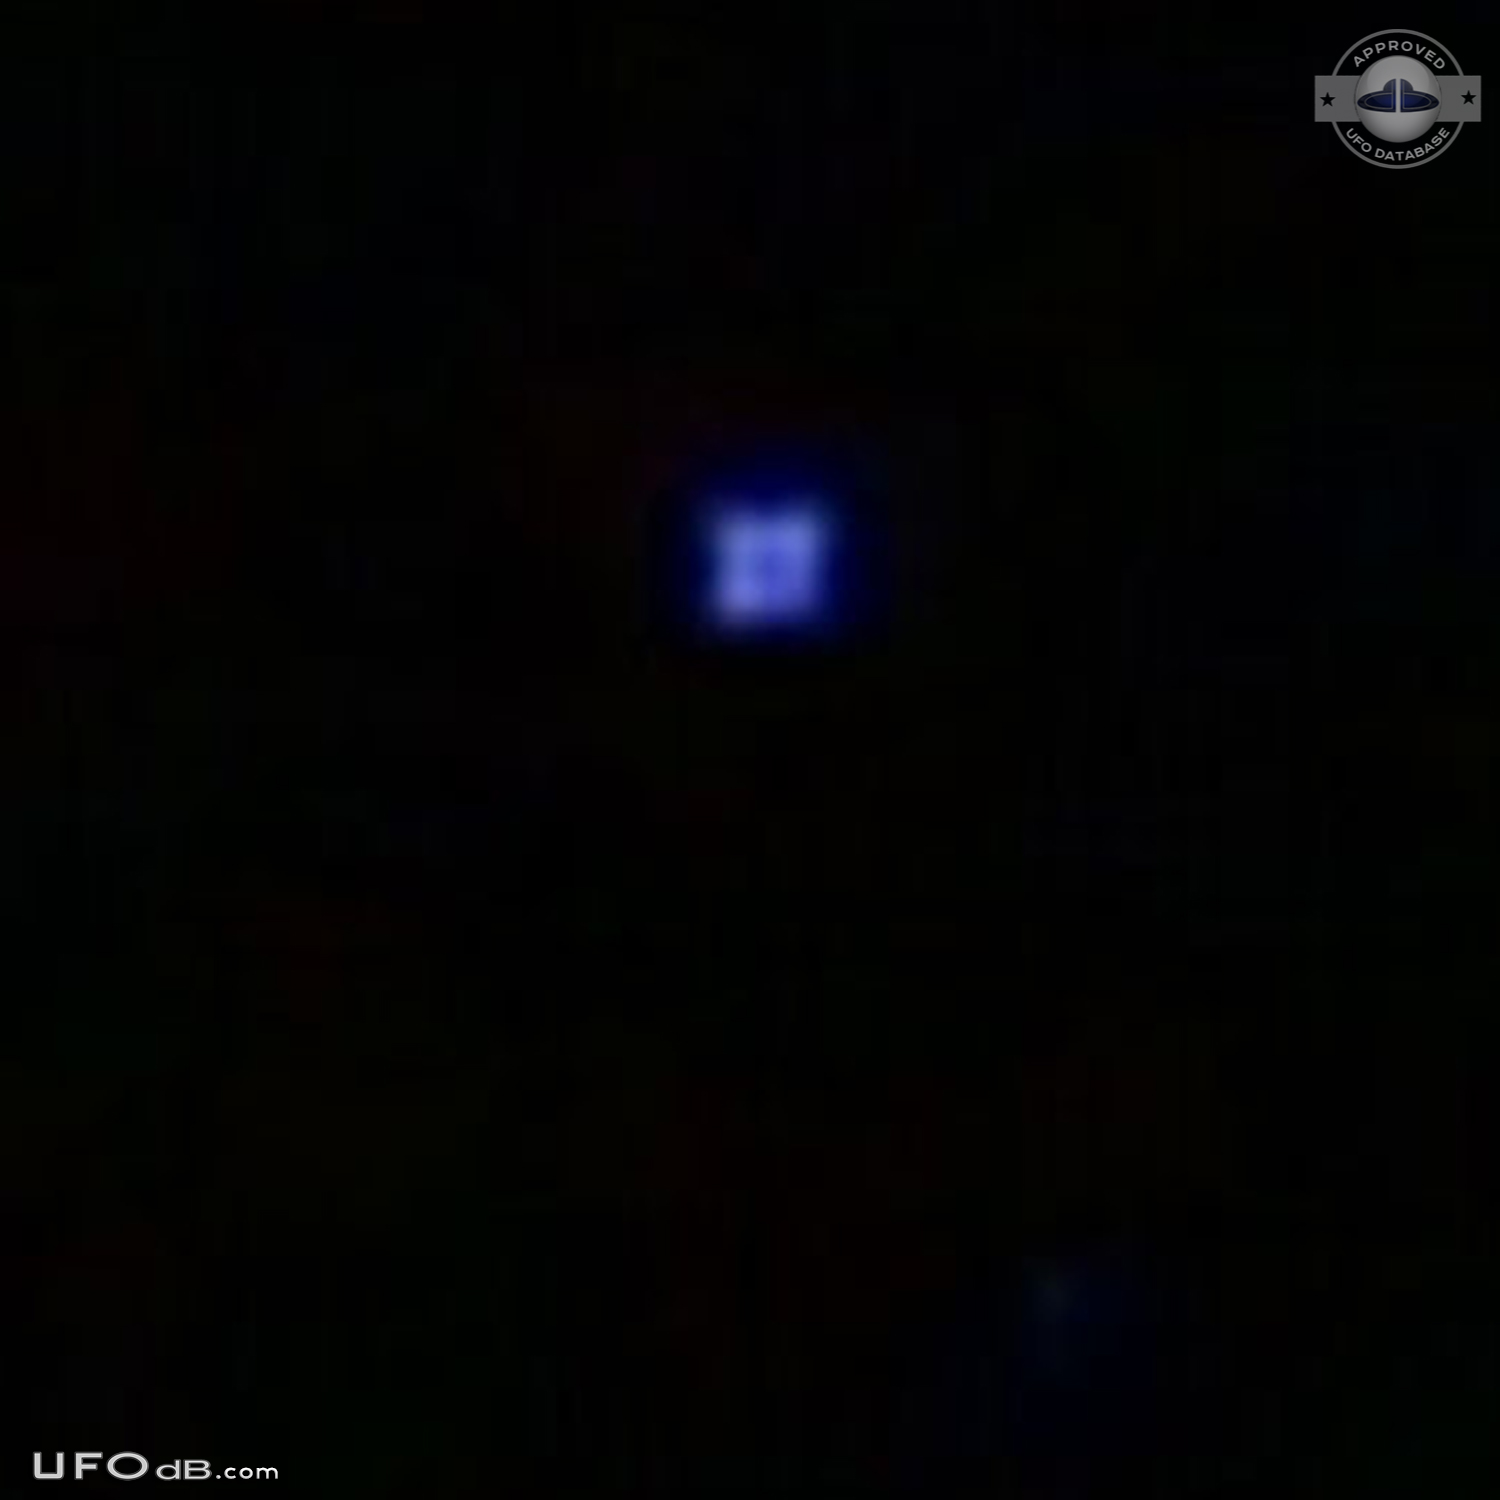 FAA AP certified person knew this was NOT a plane Houston Texas 2014 UFO Picture #650-3